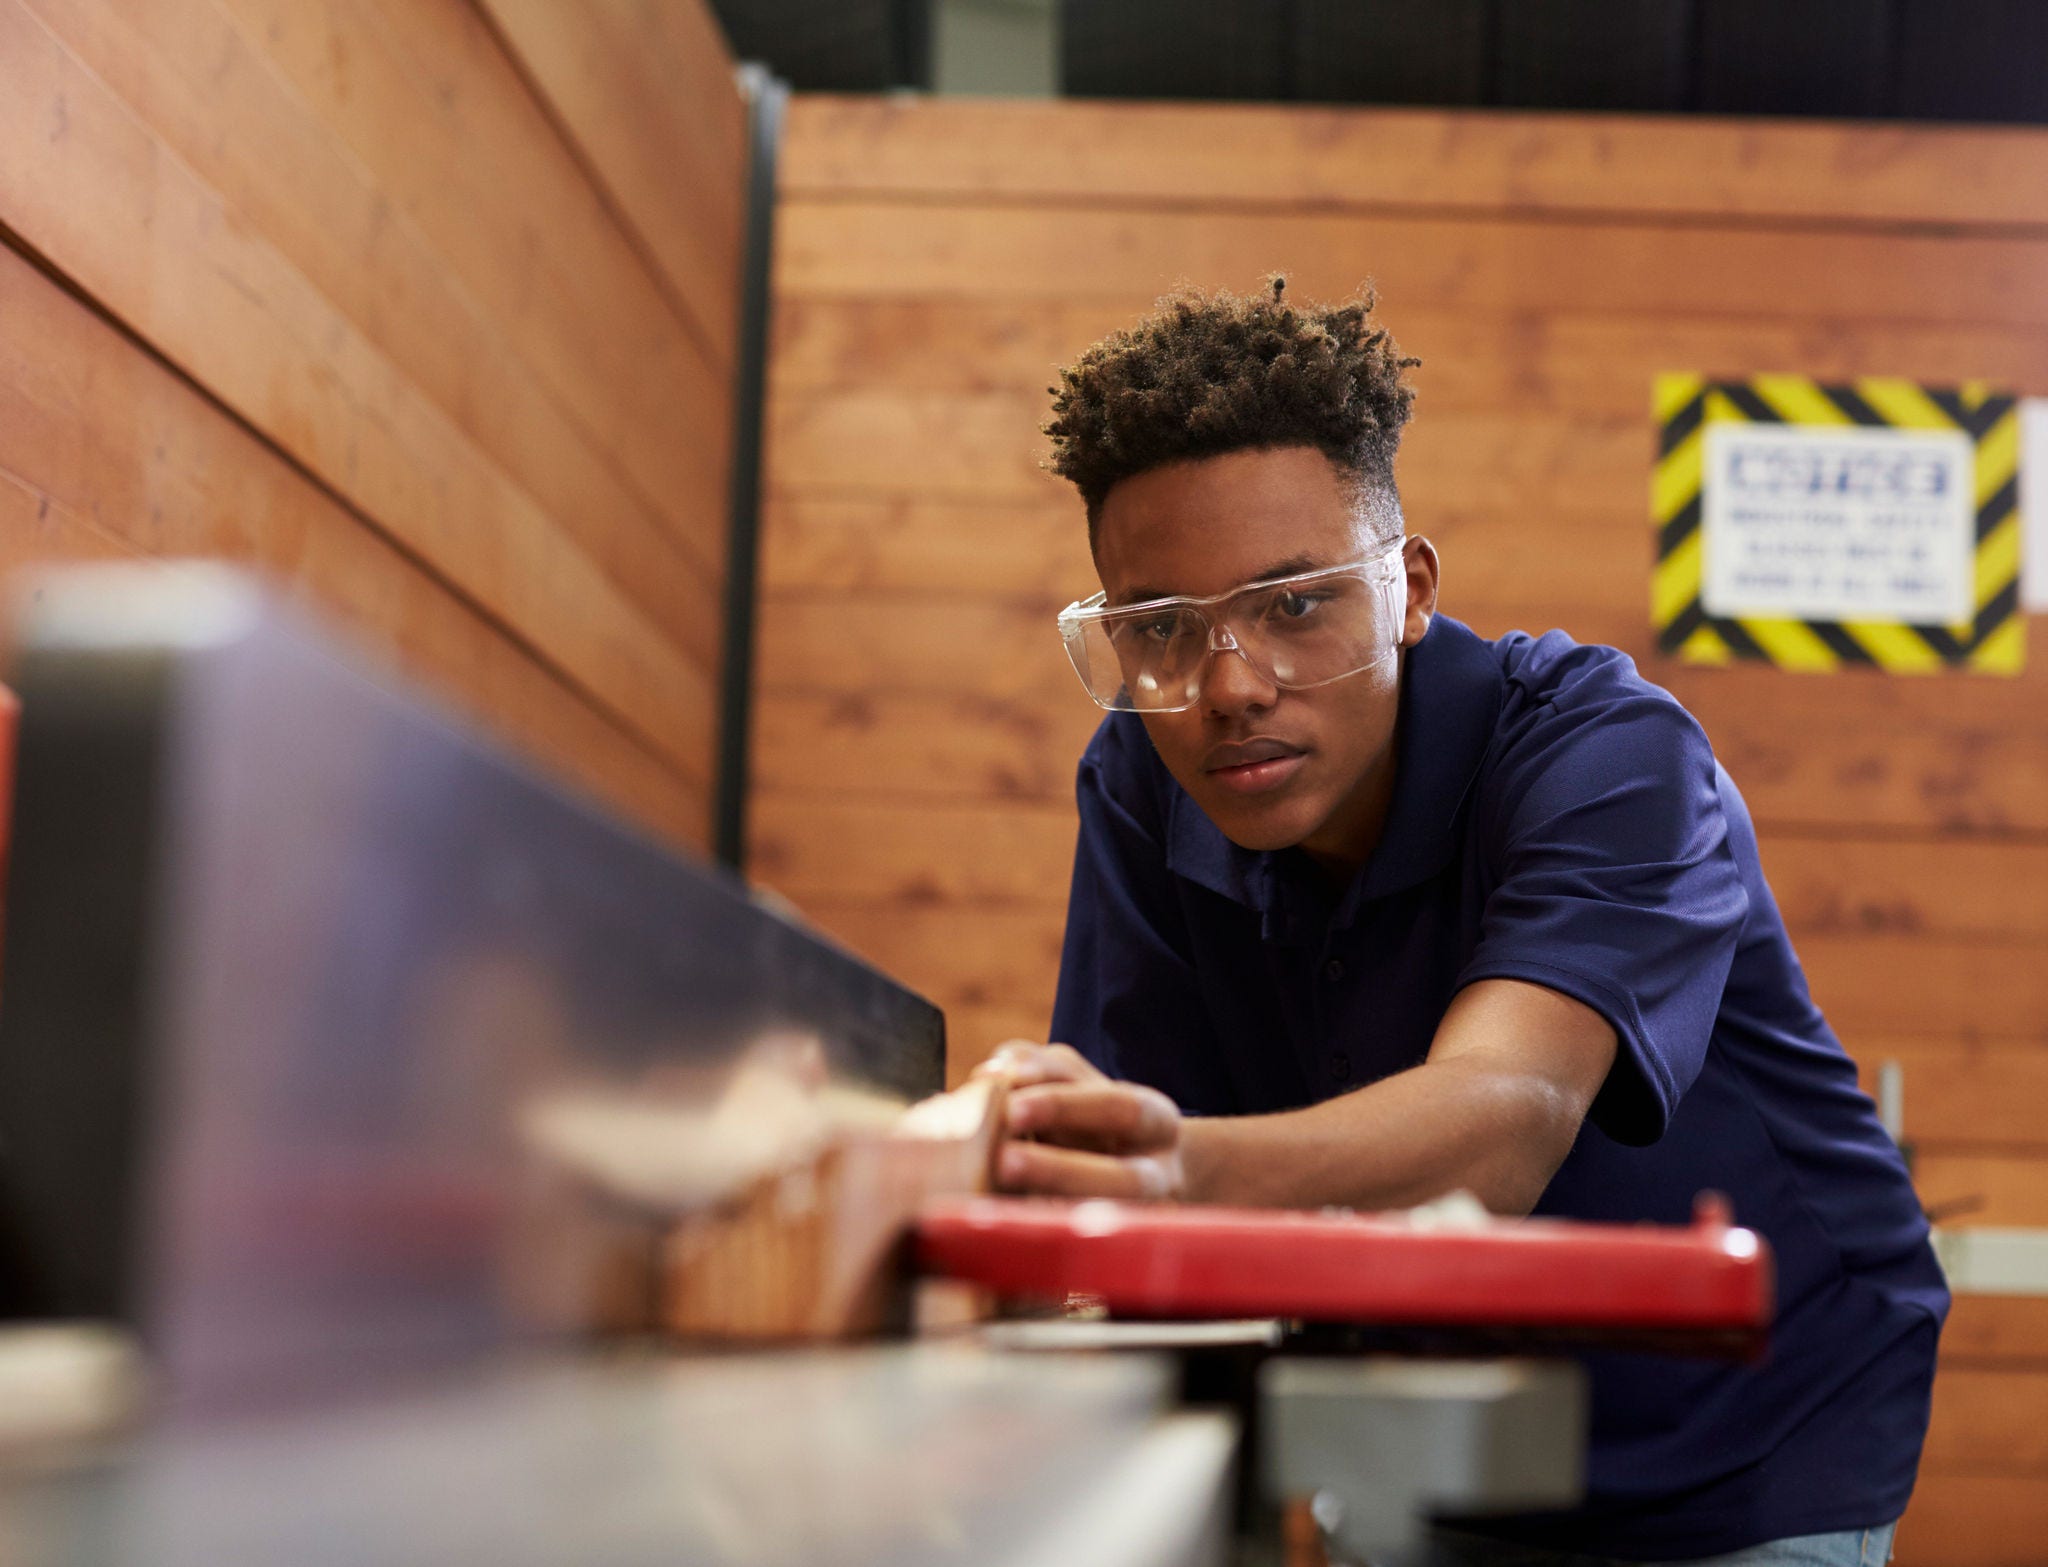 young man wearing safety glasses while cutting wood with a table saw